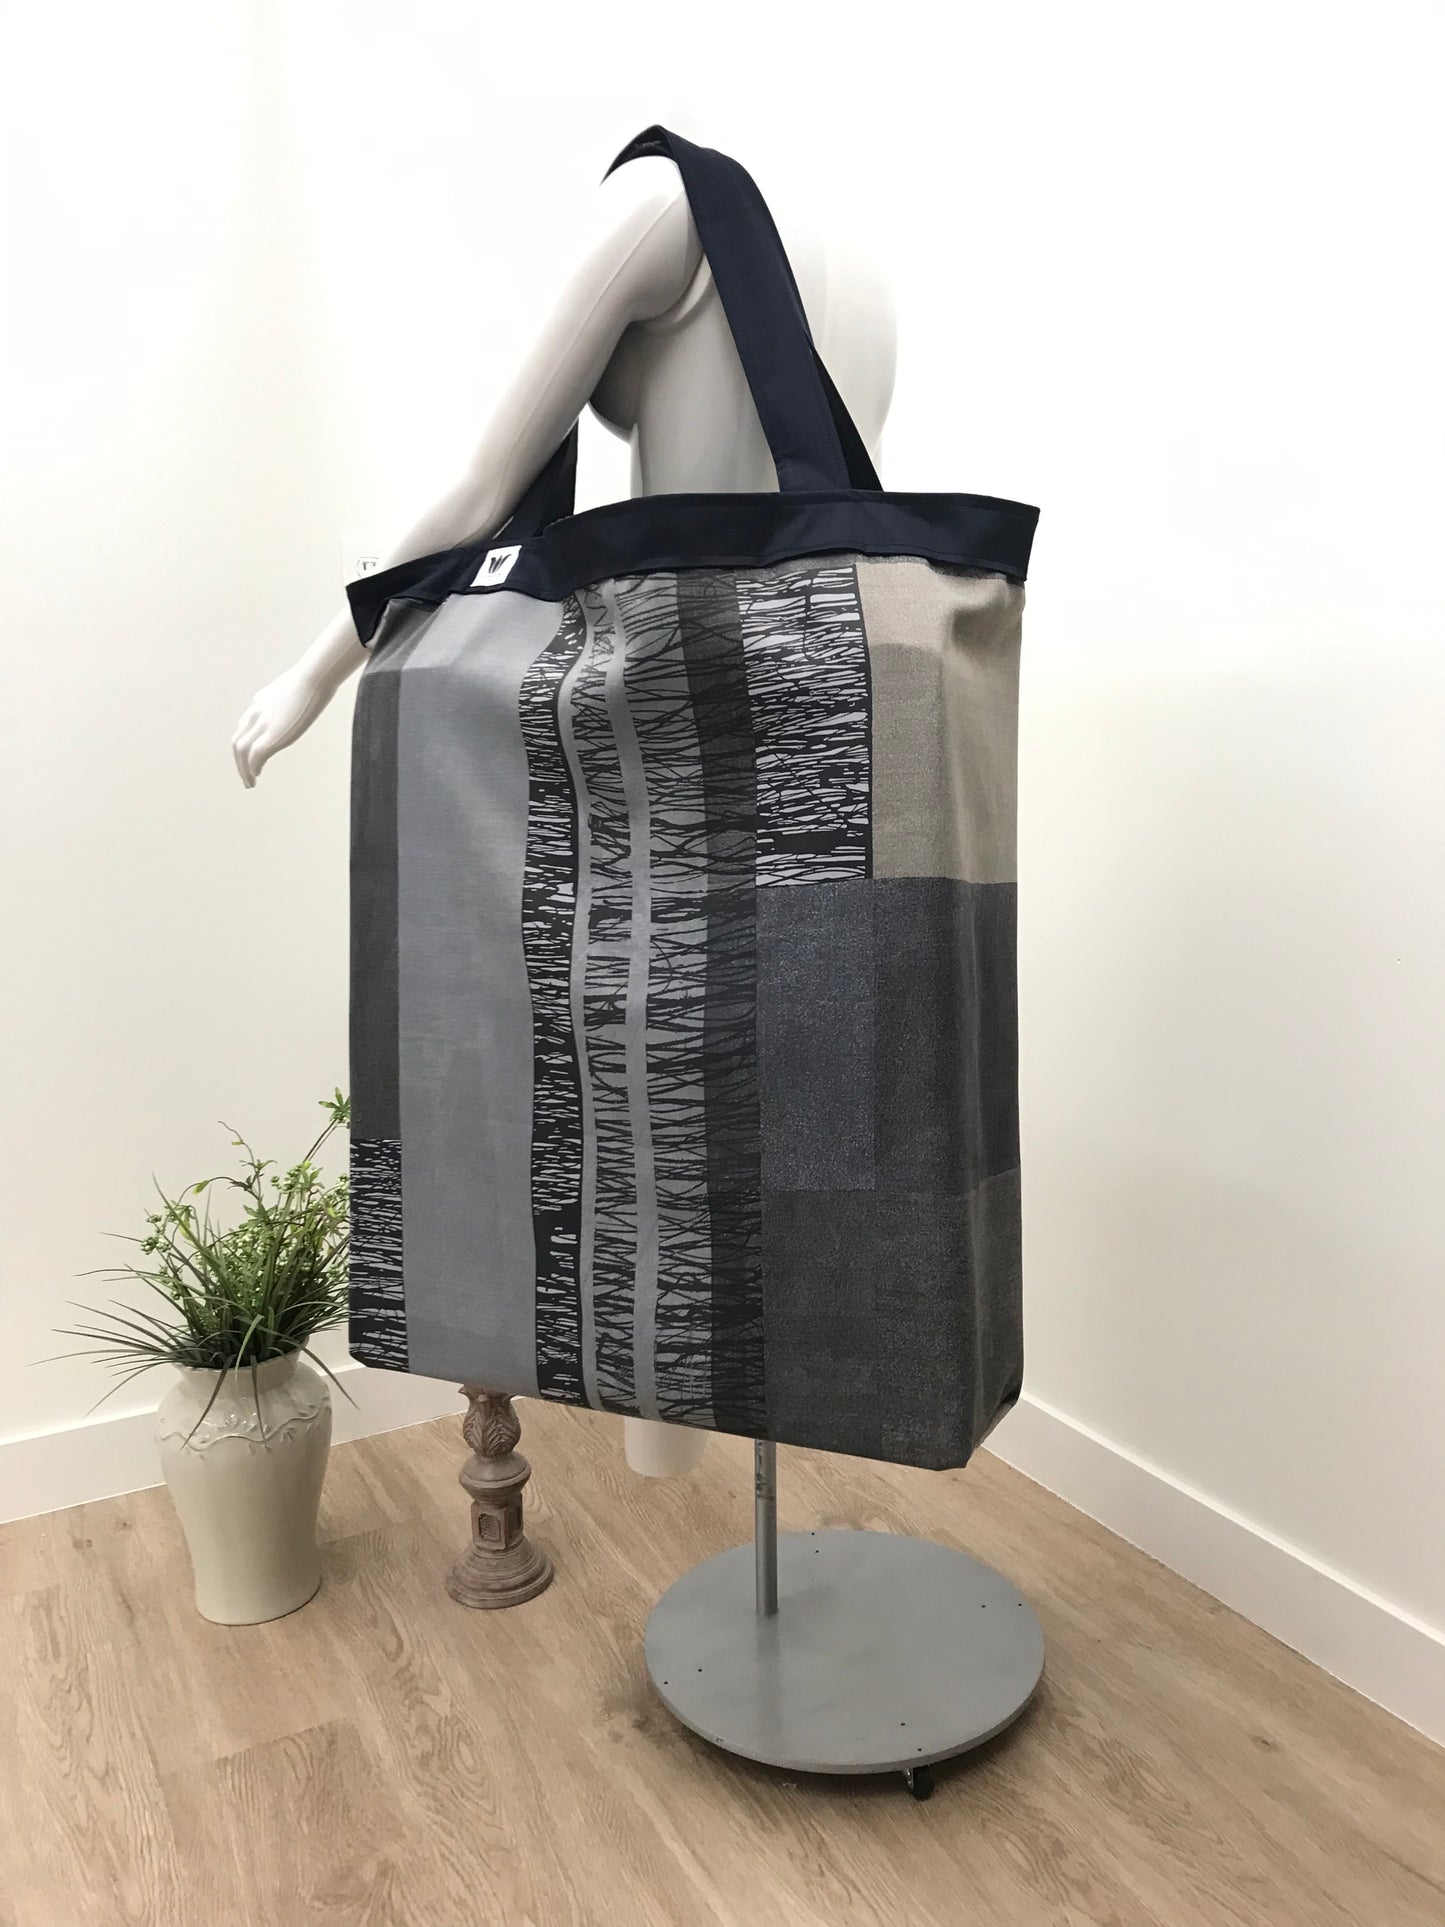 Extra Large Yoga Tote Bag in blue and grey modern graphic print  fabric to carry and or store yoga props for yoga practice. Made in Canada by My Yoga Room Elements